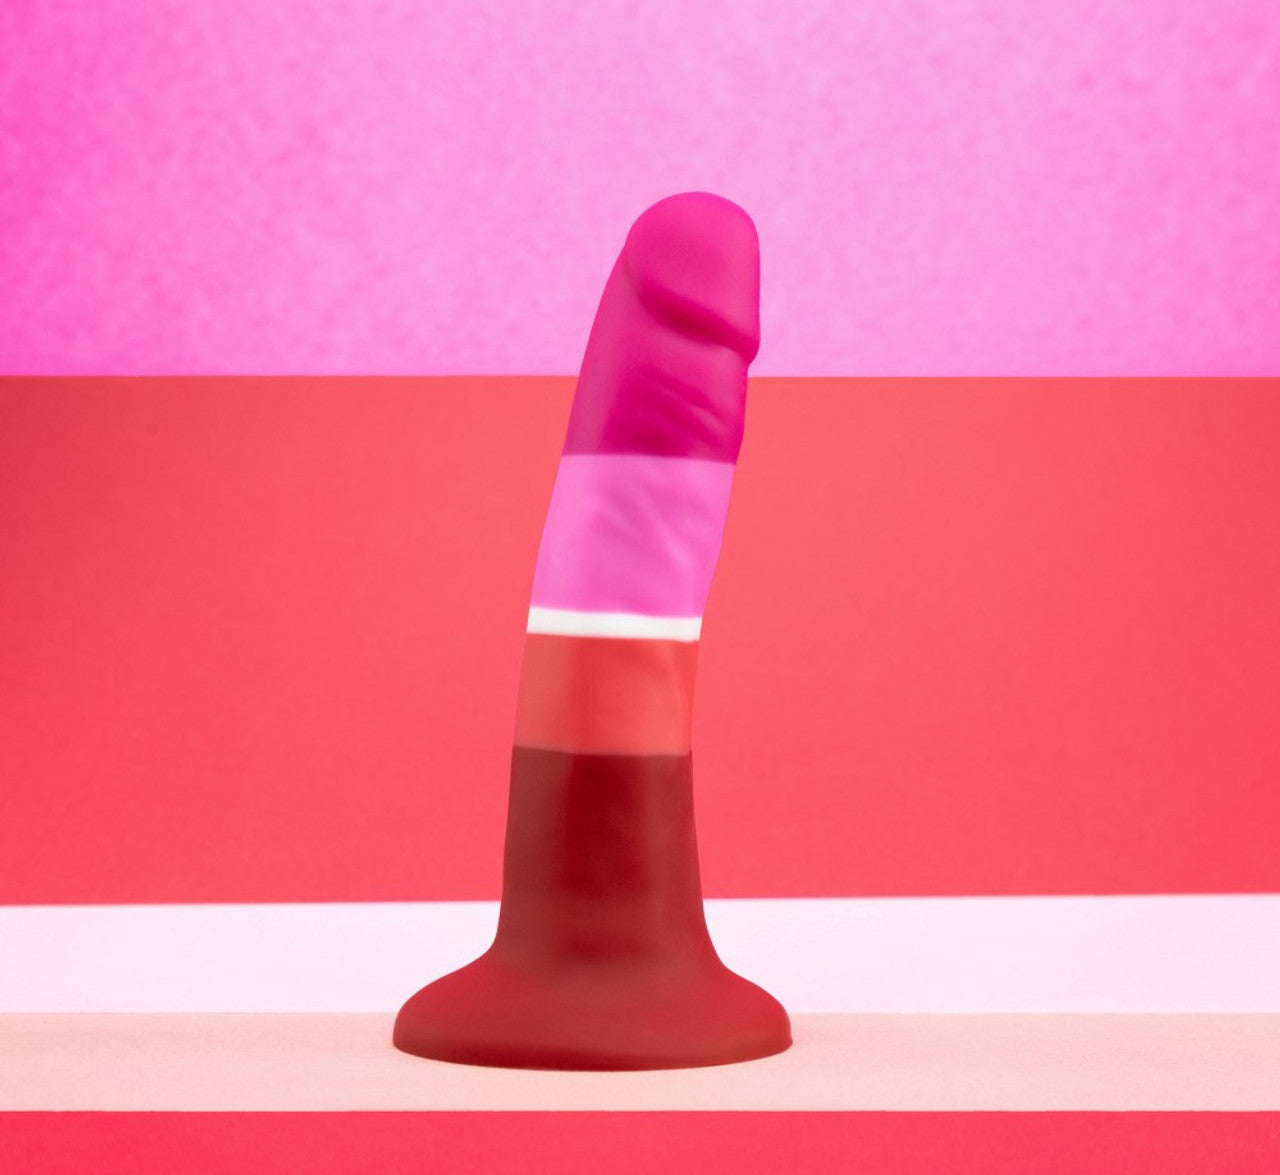 Avant Pride P3 Beauty Silicone Dildo - Thorn & Feather